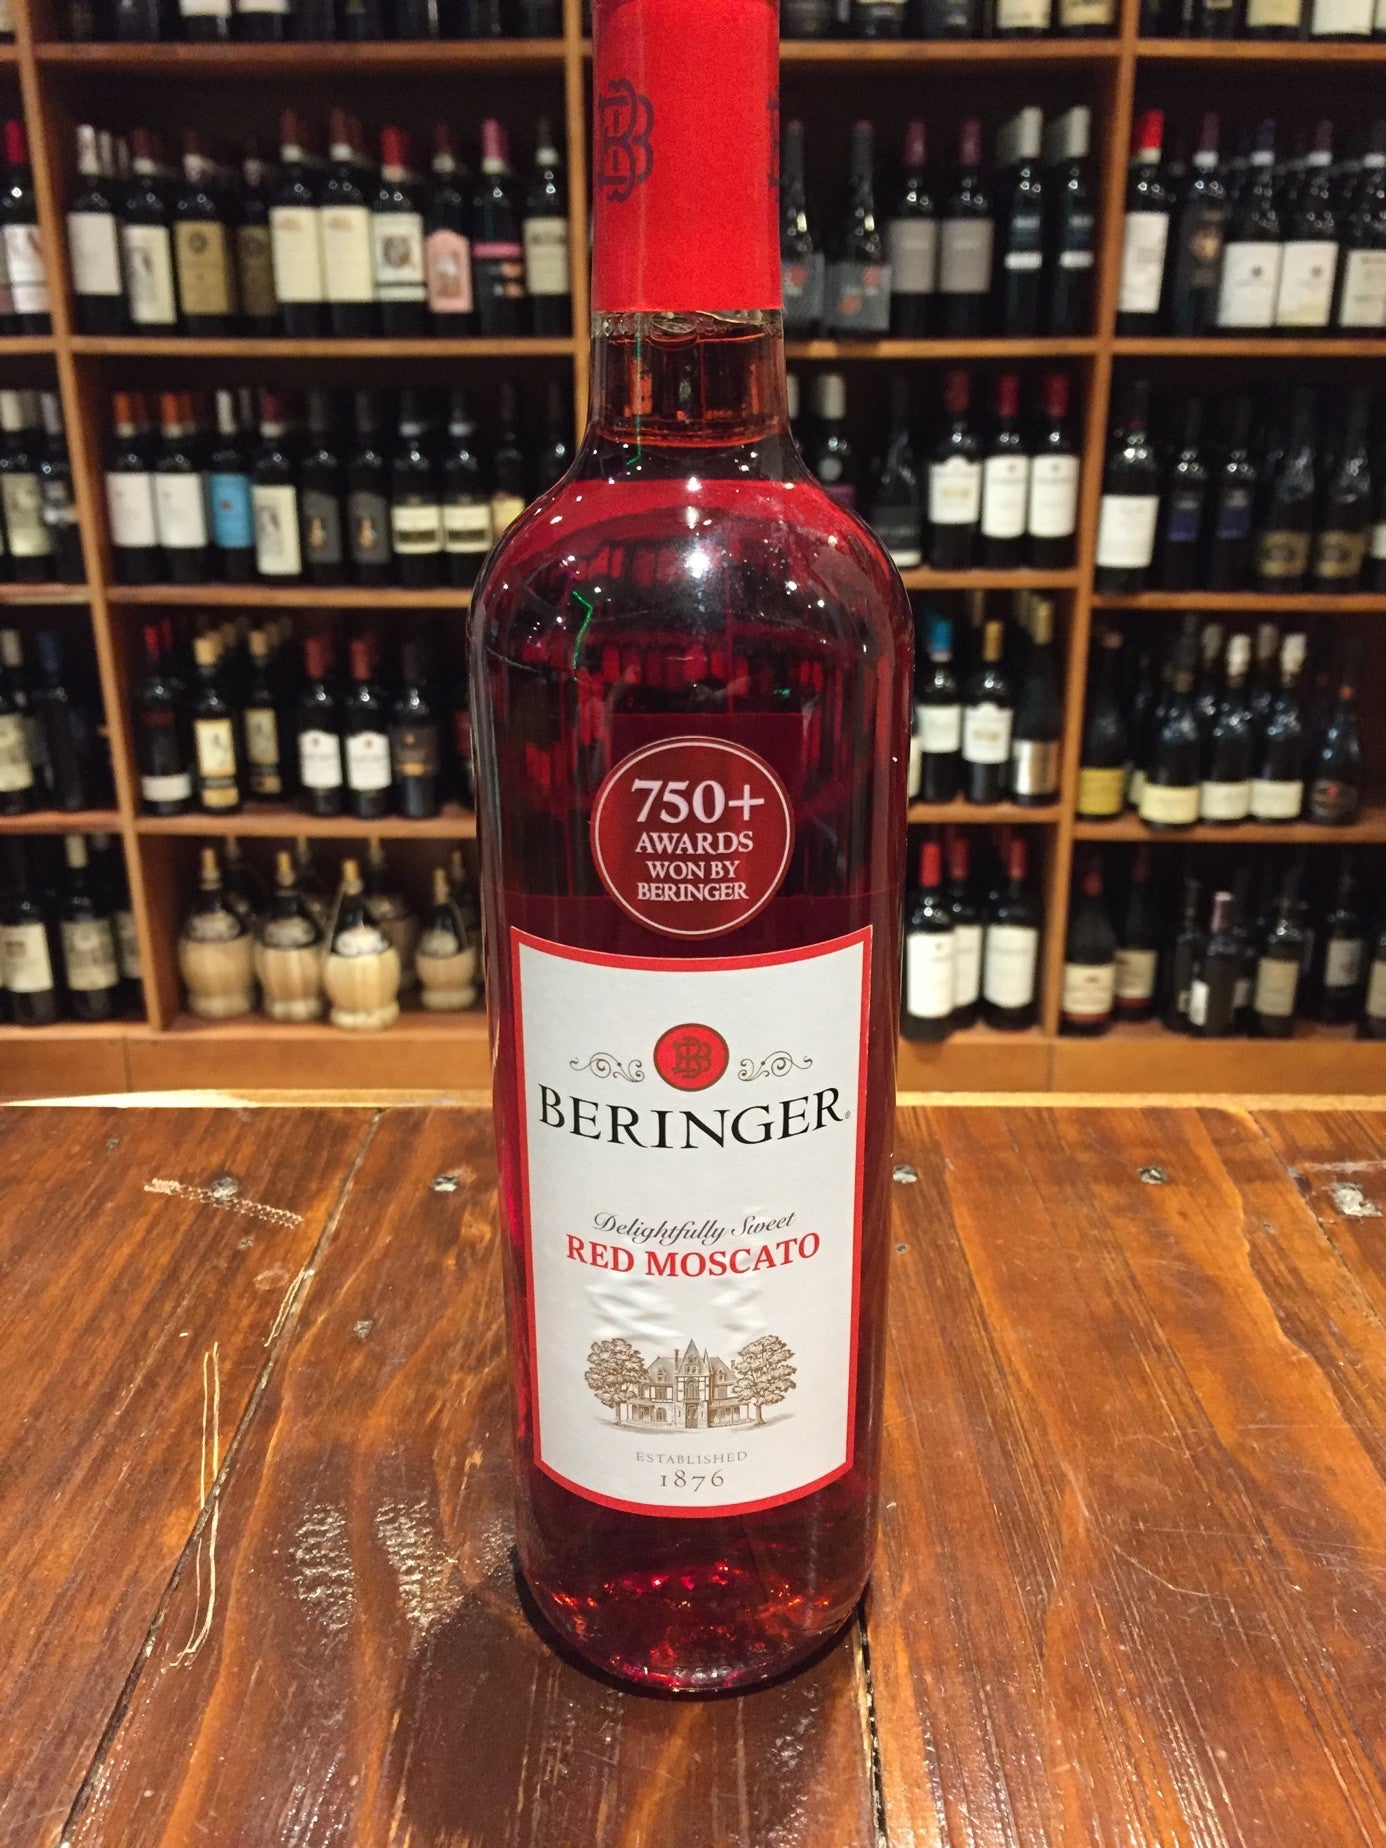 Beringer Red Moscato 750ml clear bottle with red liquid and a white label